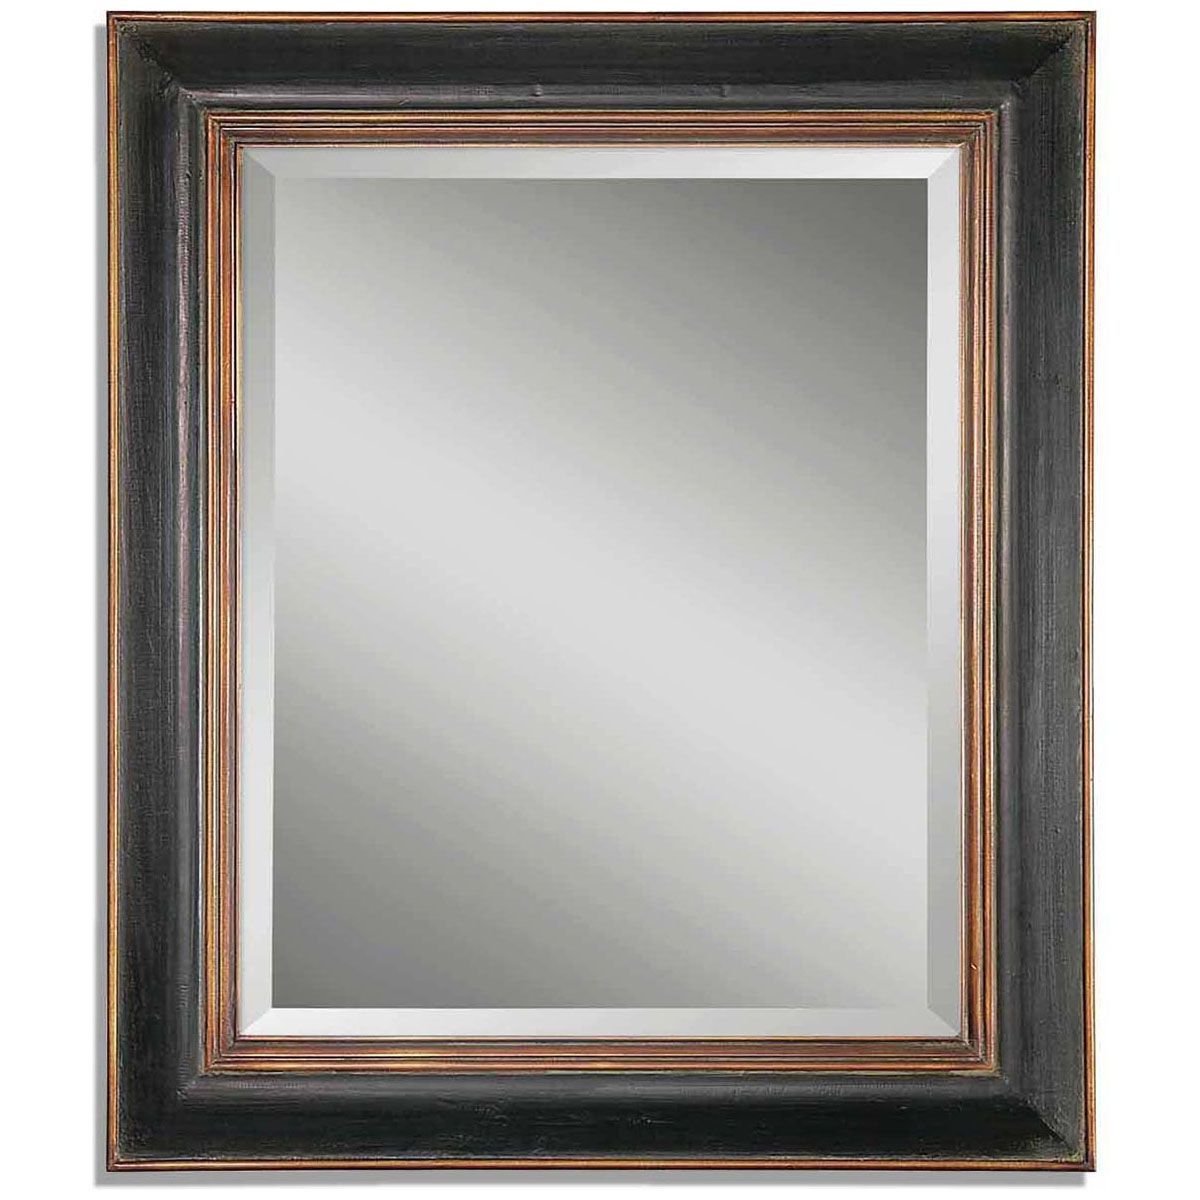 Widely Used Black Wood Wall Mirrors With Uttermost Fabiano Black Wood Mirror 07023 B (View 2 of 15)